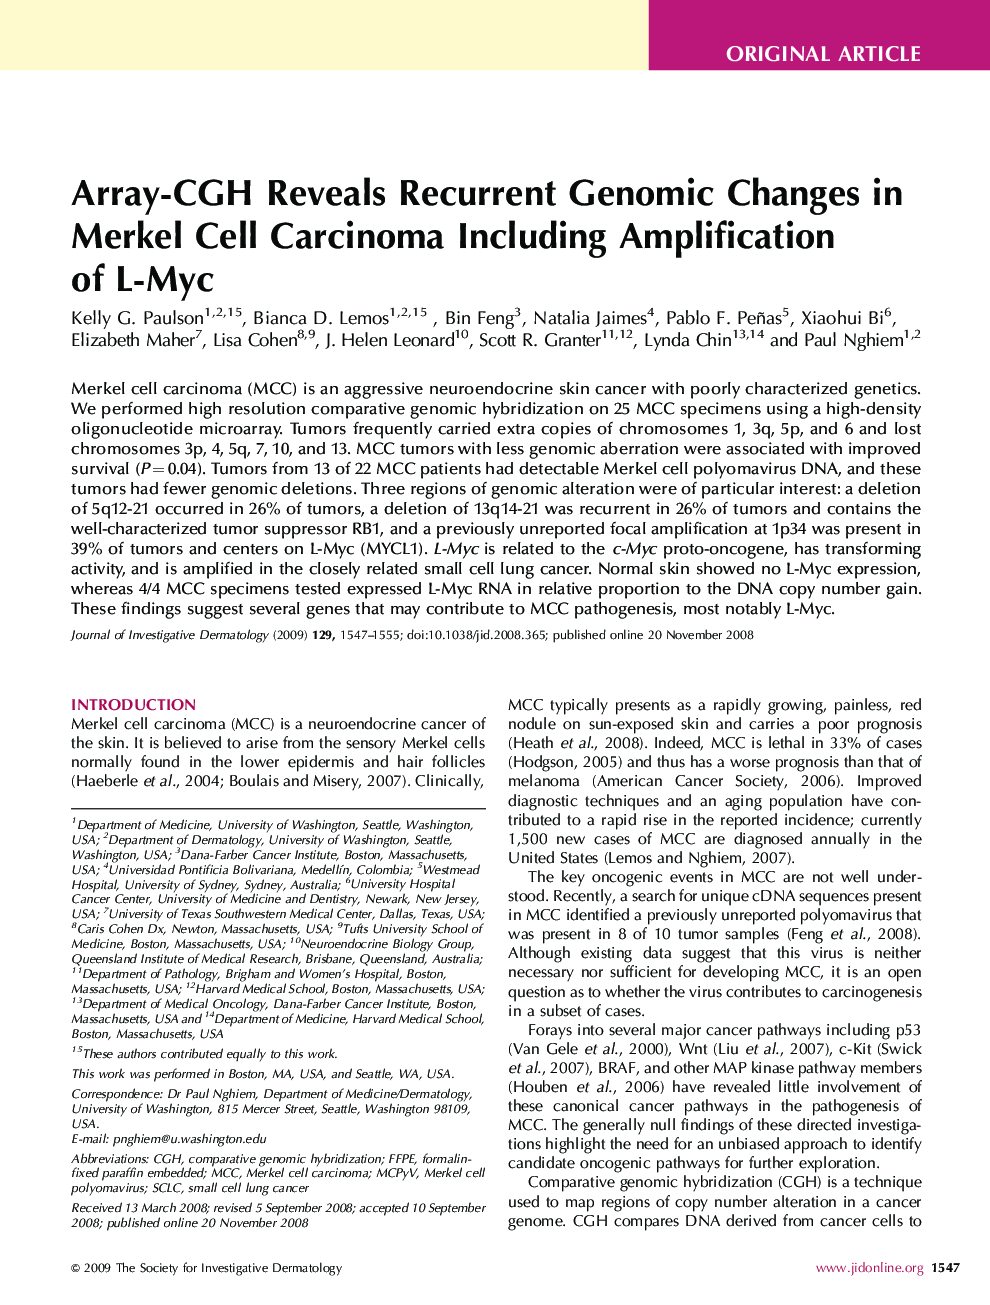 Array-CGH Reveals Recurrent Genomic Changes in Merkel Cell Carcinoma Including Amplification of L-Myc 